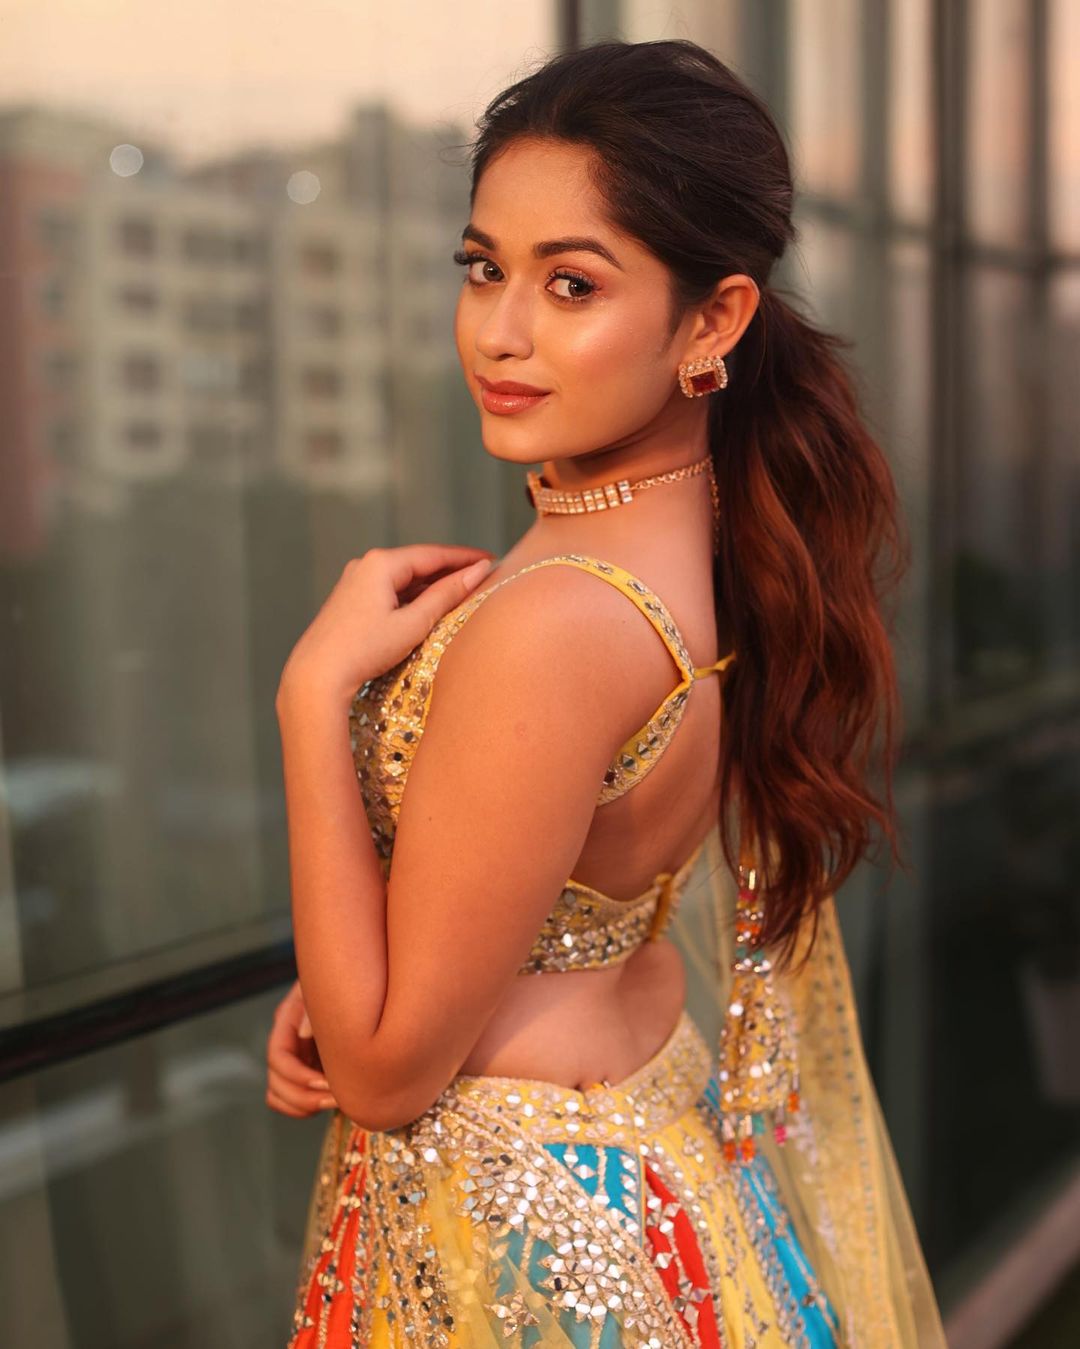 Jannat-Zubair-looks-adorable-in-traditional-outfit-See-the-pictures-01-Bengalplanet.com